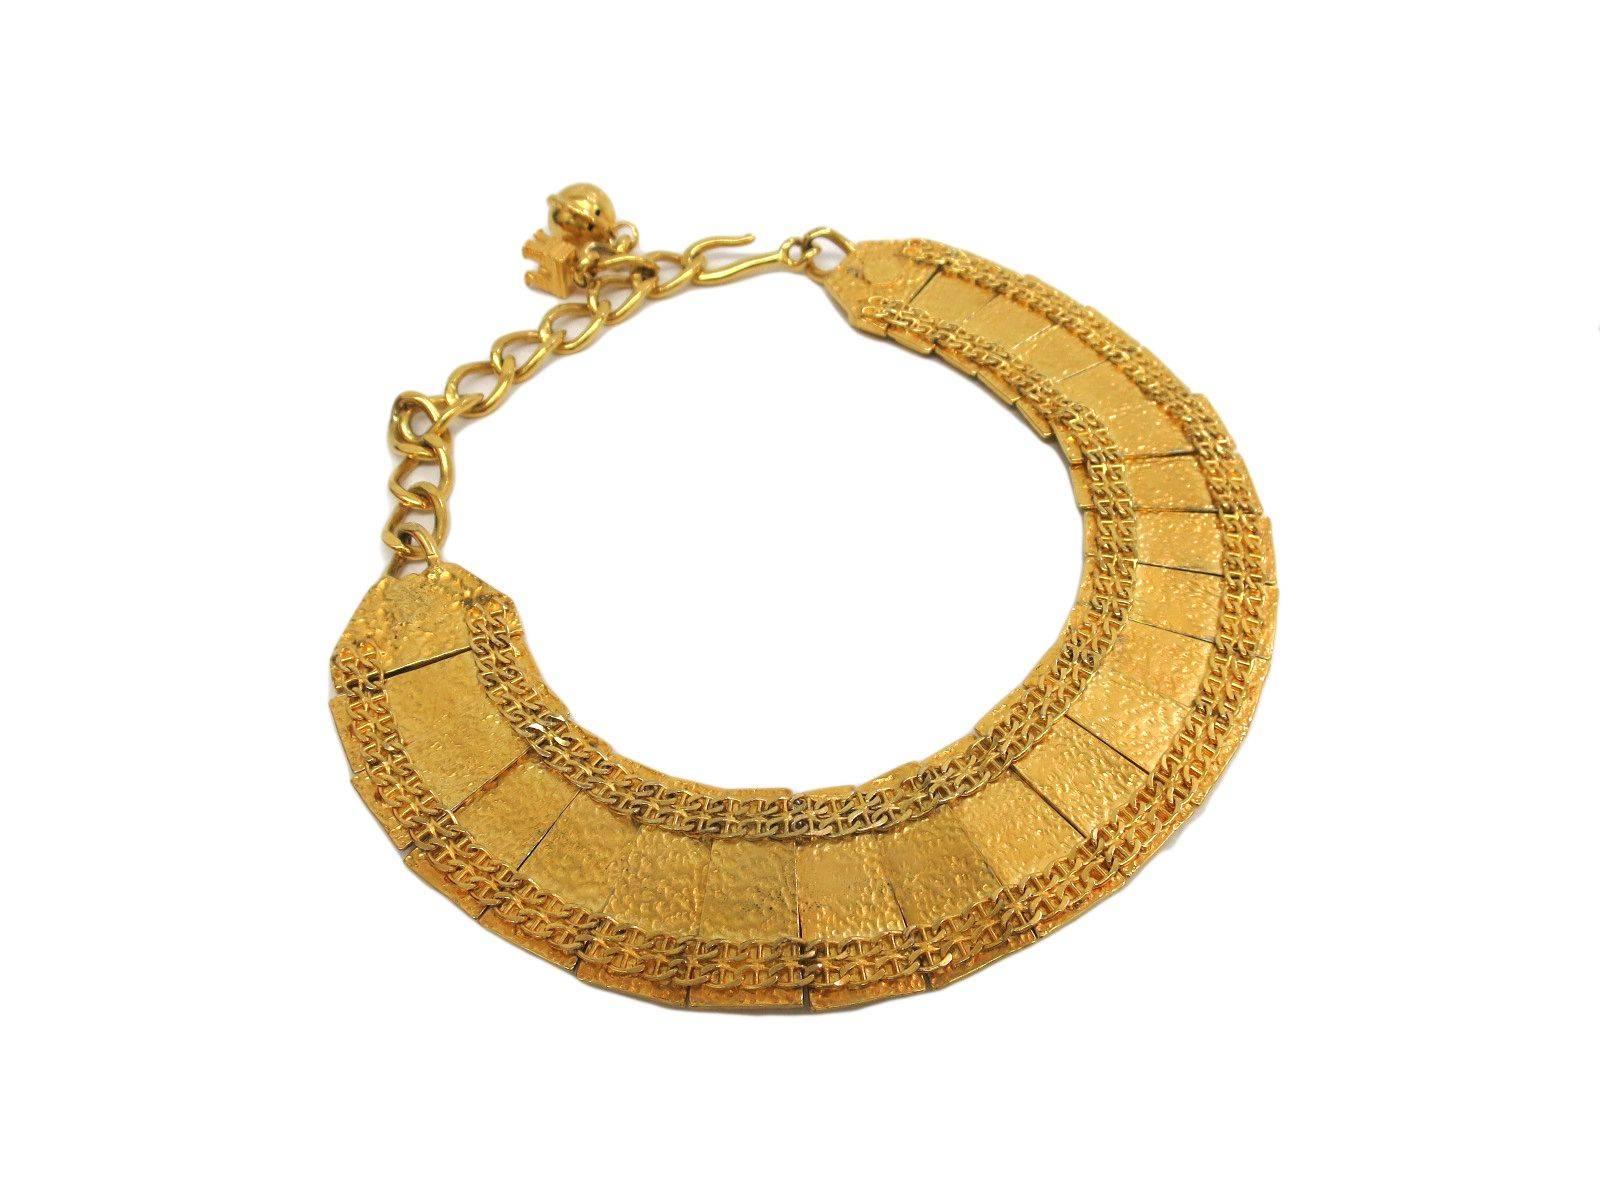 CURATOR'S NOTES

Celine Rare Vintage Arc de Triomphe Gold Chain Link Collar Statement Necklace  

A rare and beautiful find: vintage Celine Arc de Triomphe collar necklace.  The ultimate statement accessory you will return to again and again.

Gold